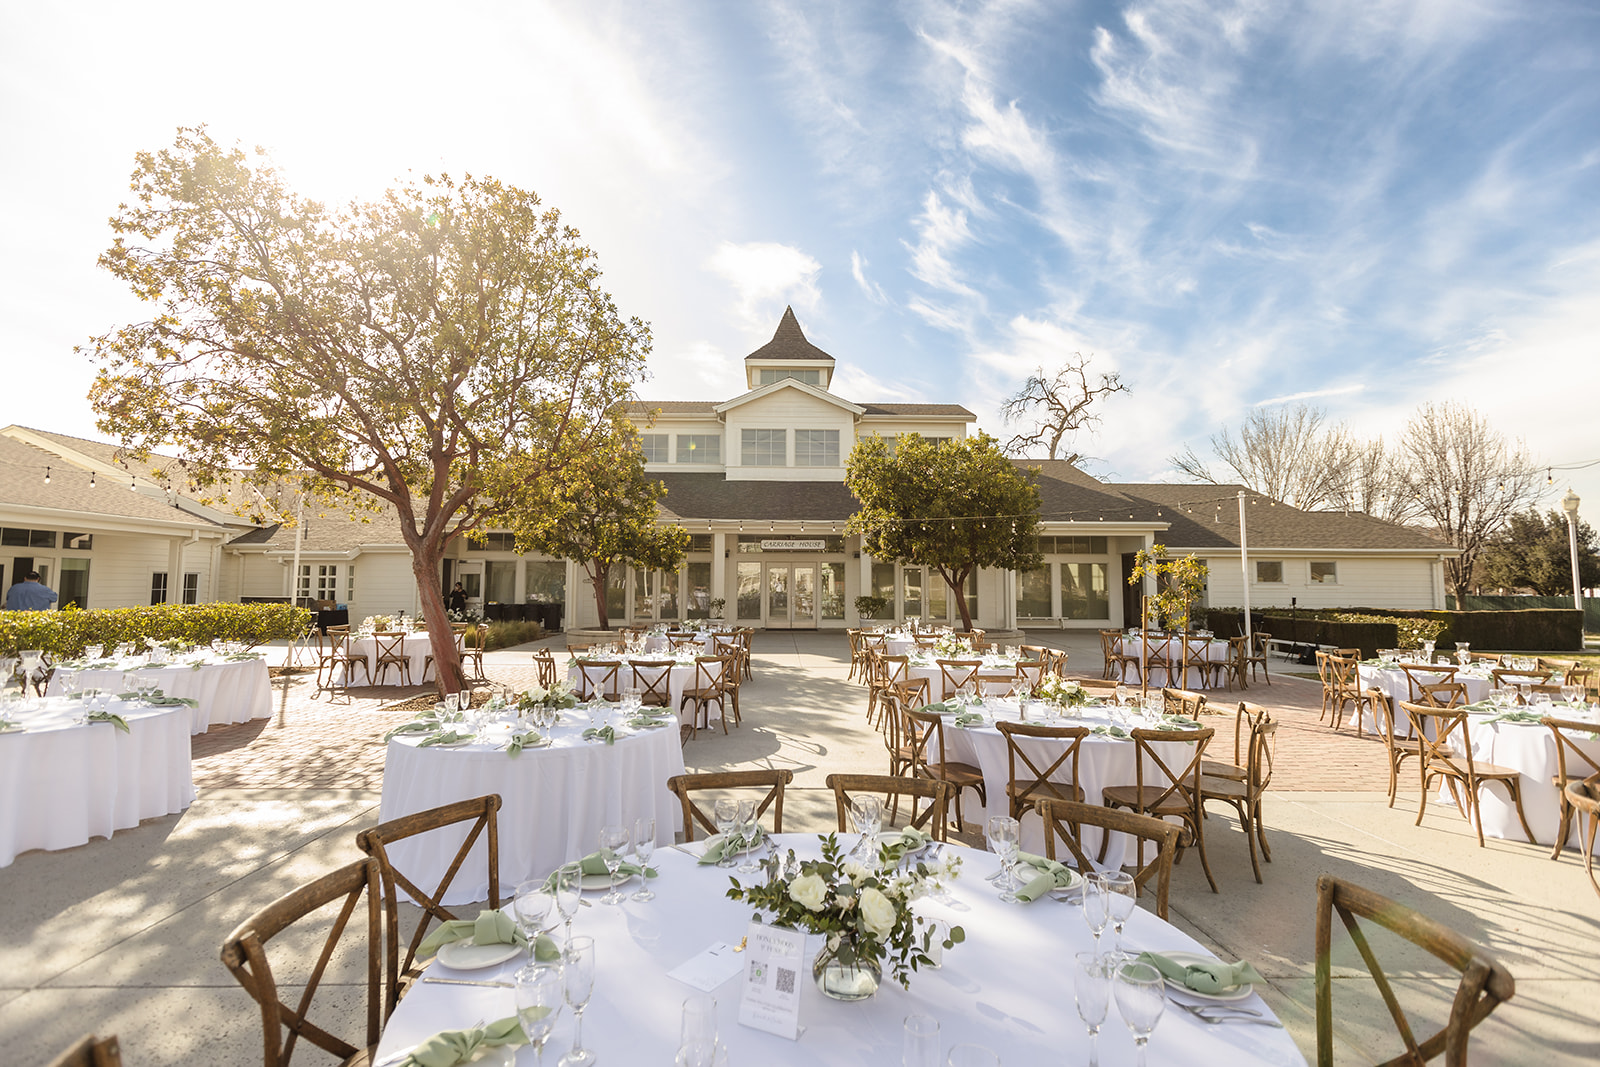 Outdoor courtyard wedding reception at Crestmore Manor with white and sage green decor.